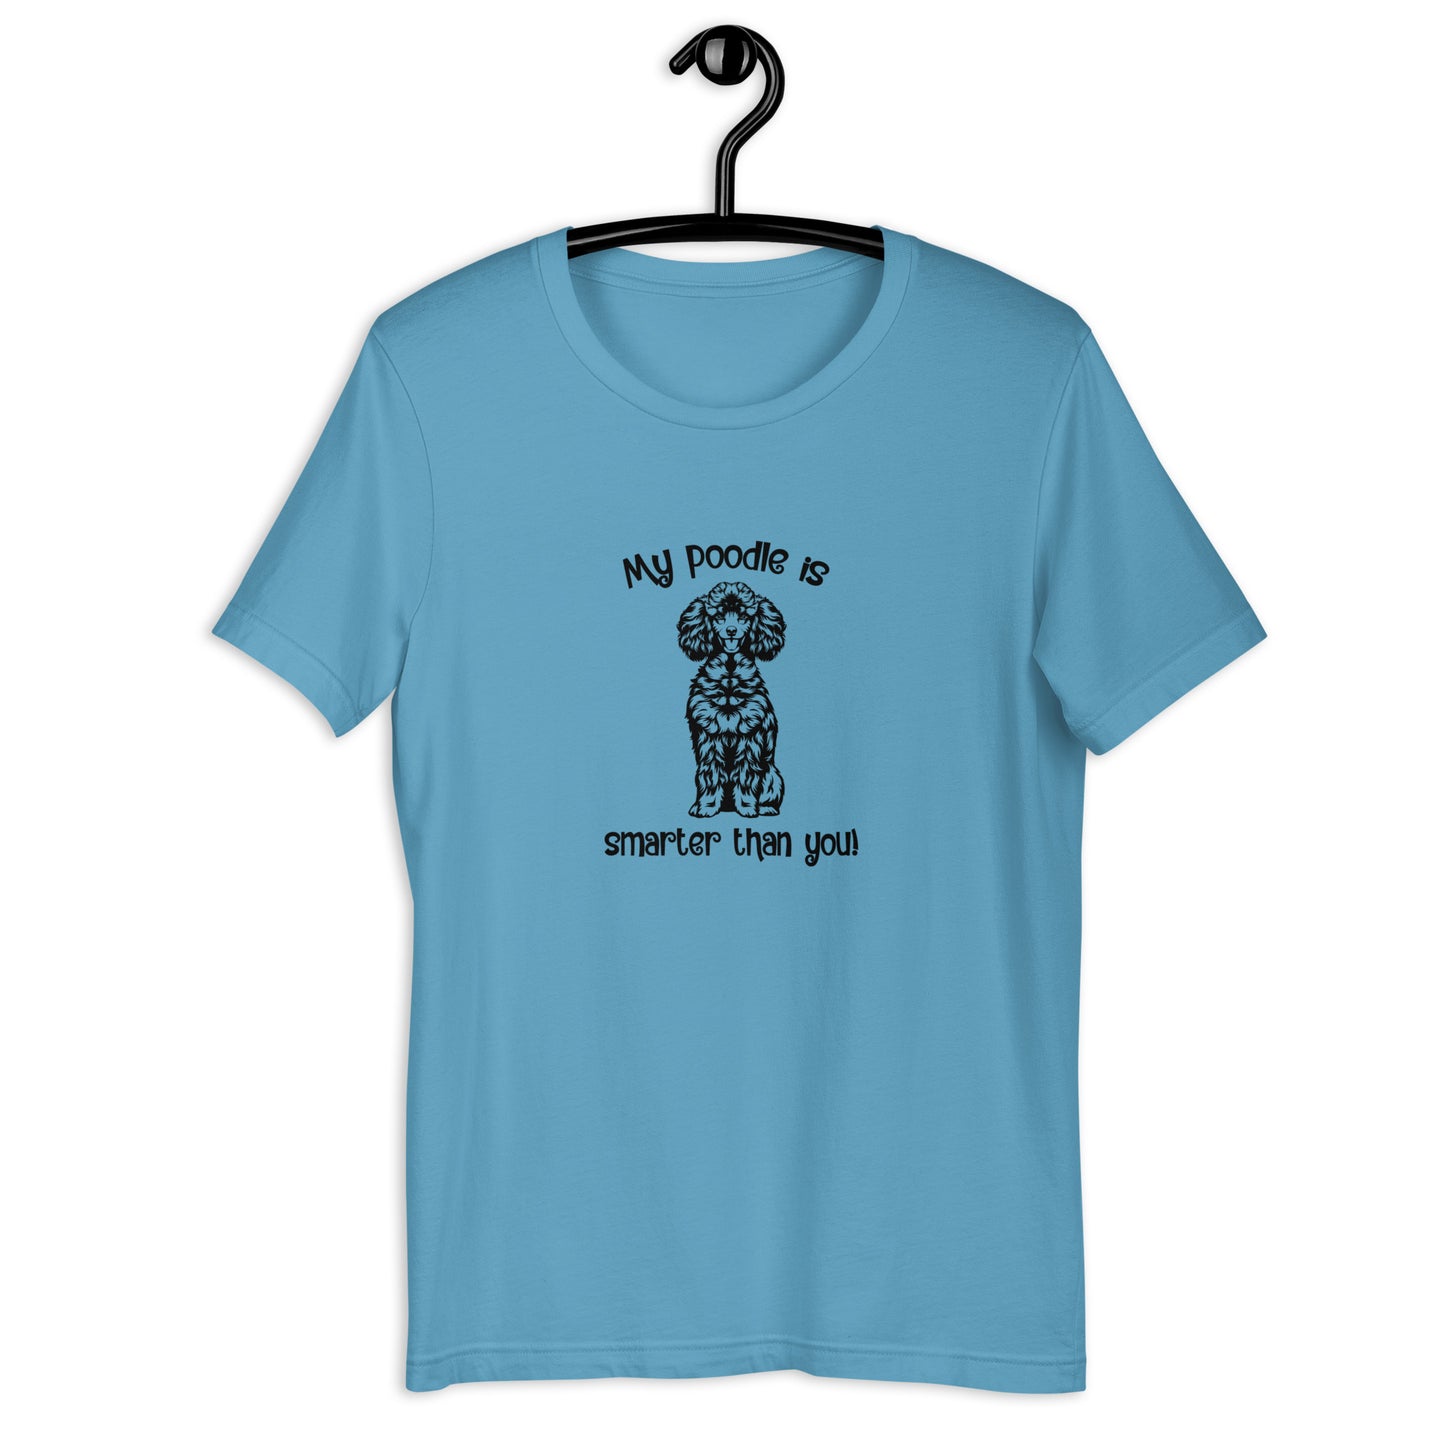 MY POODLE IS SMARTER THAN YOU  -  Unisex t-shirt